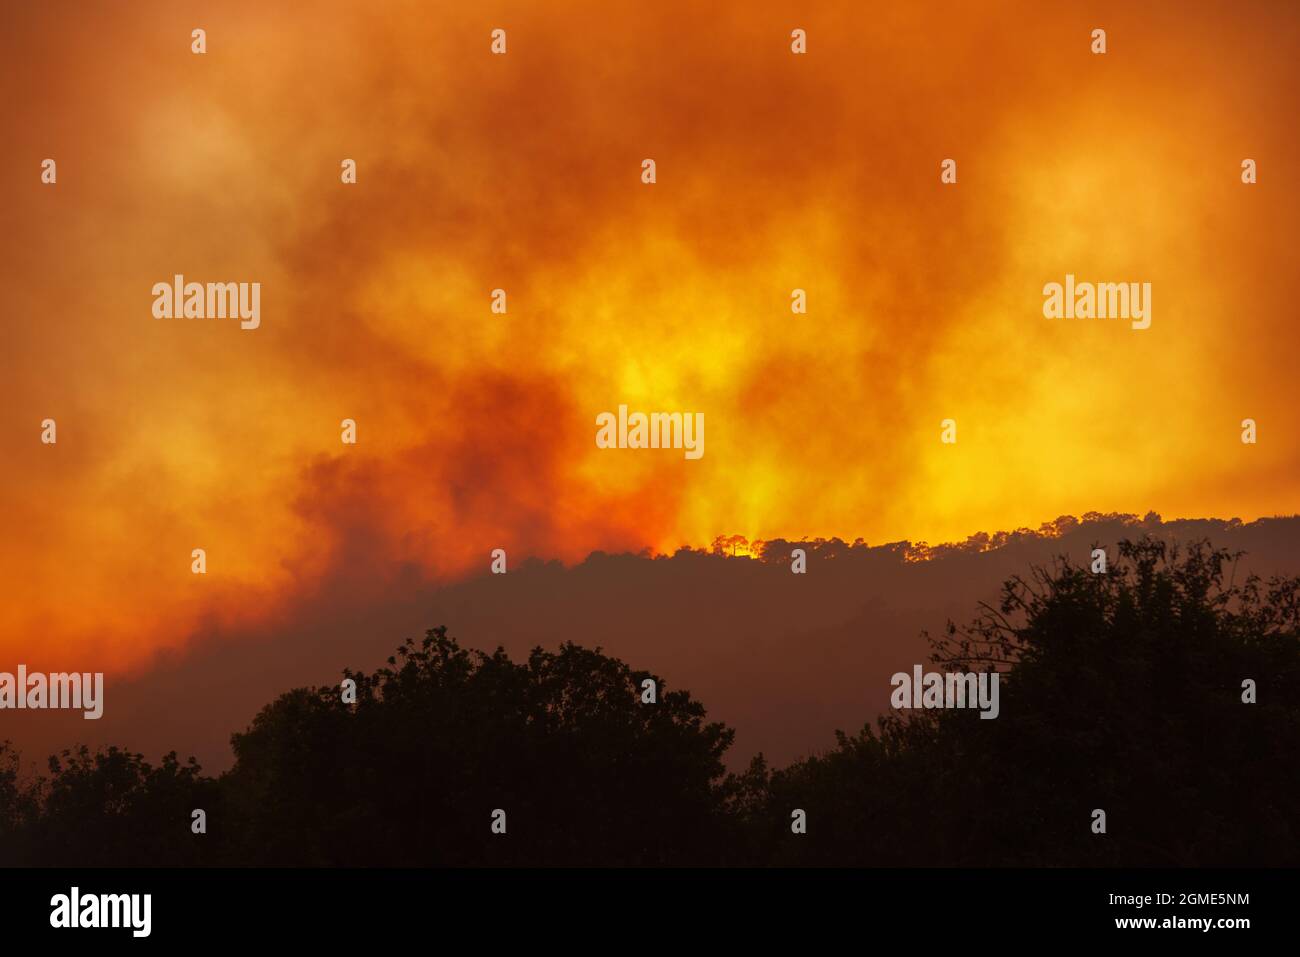 Forest wildfire at night from a distance, with silhouettes of trees against dramatic red sky and heavy smoke Stock Photo